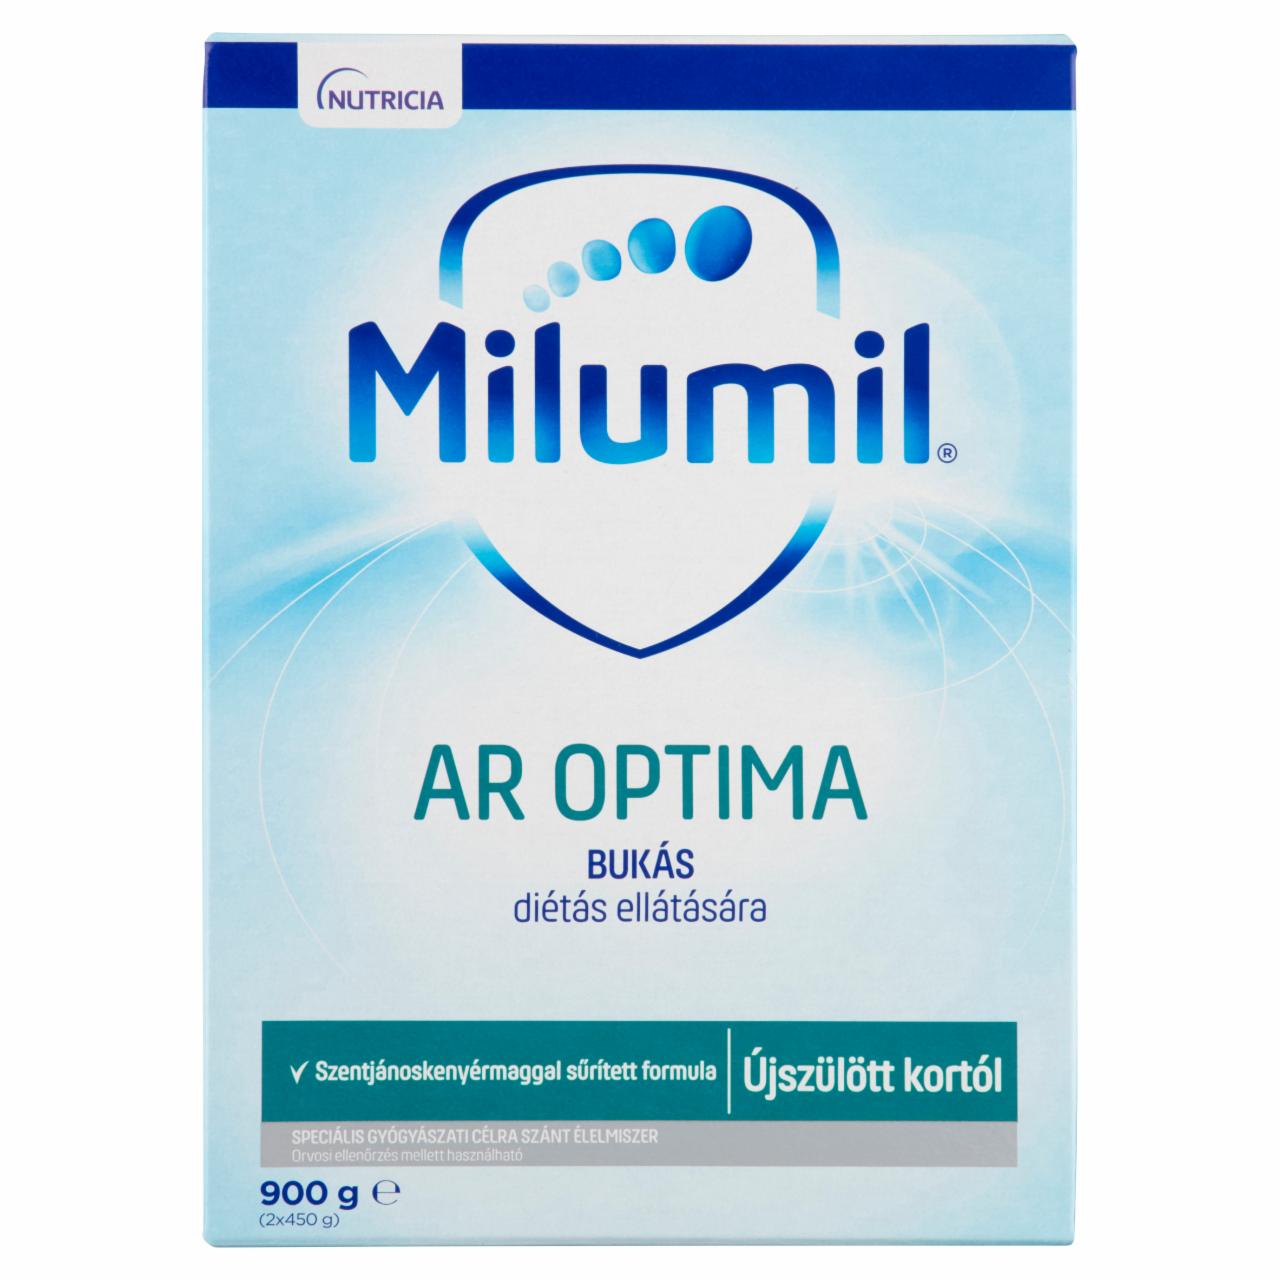 Photo - Milumil AR Optima Special Medicated Baby Food 0+ Months 2 x 450 g (900 g)